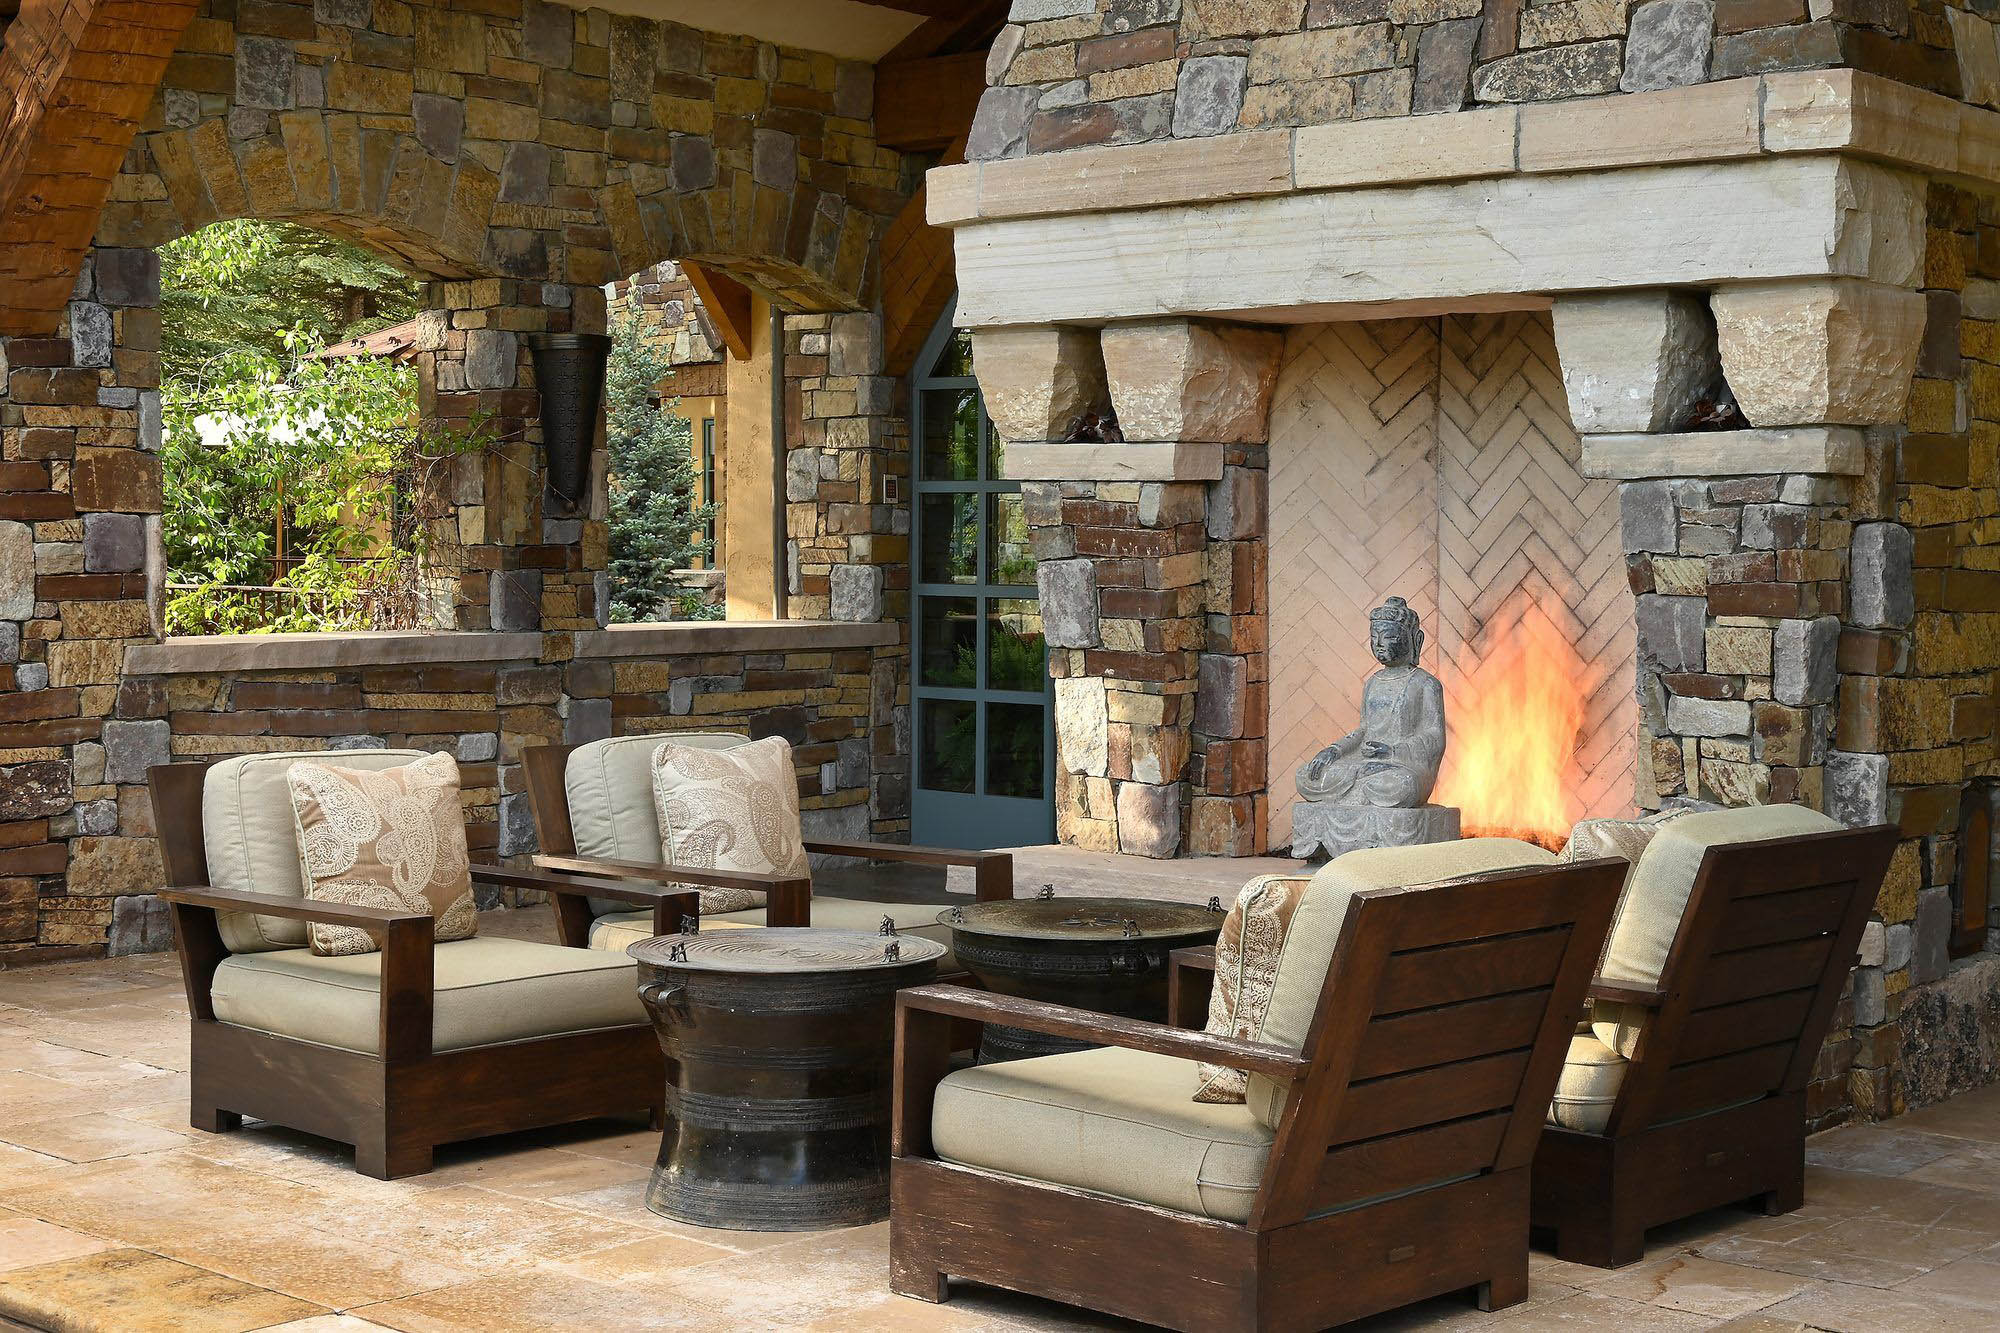 Rustic outdoor patio furniture set. Real wood chairs with tan cushions and throw pillows. Beautiful outdoor patio fireplace with lots of stone veneer.